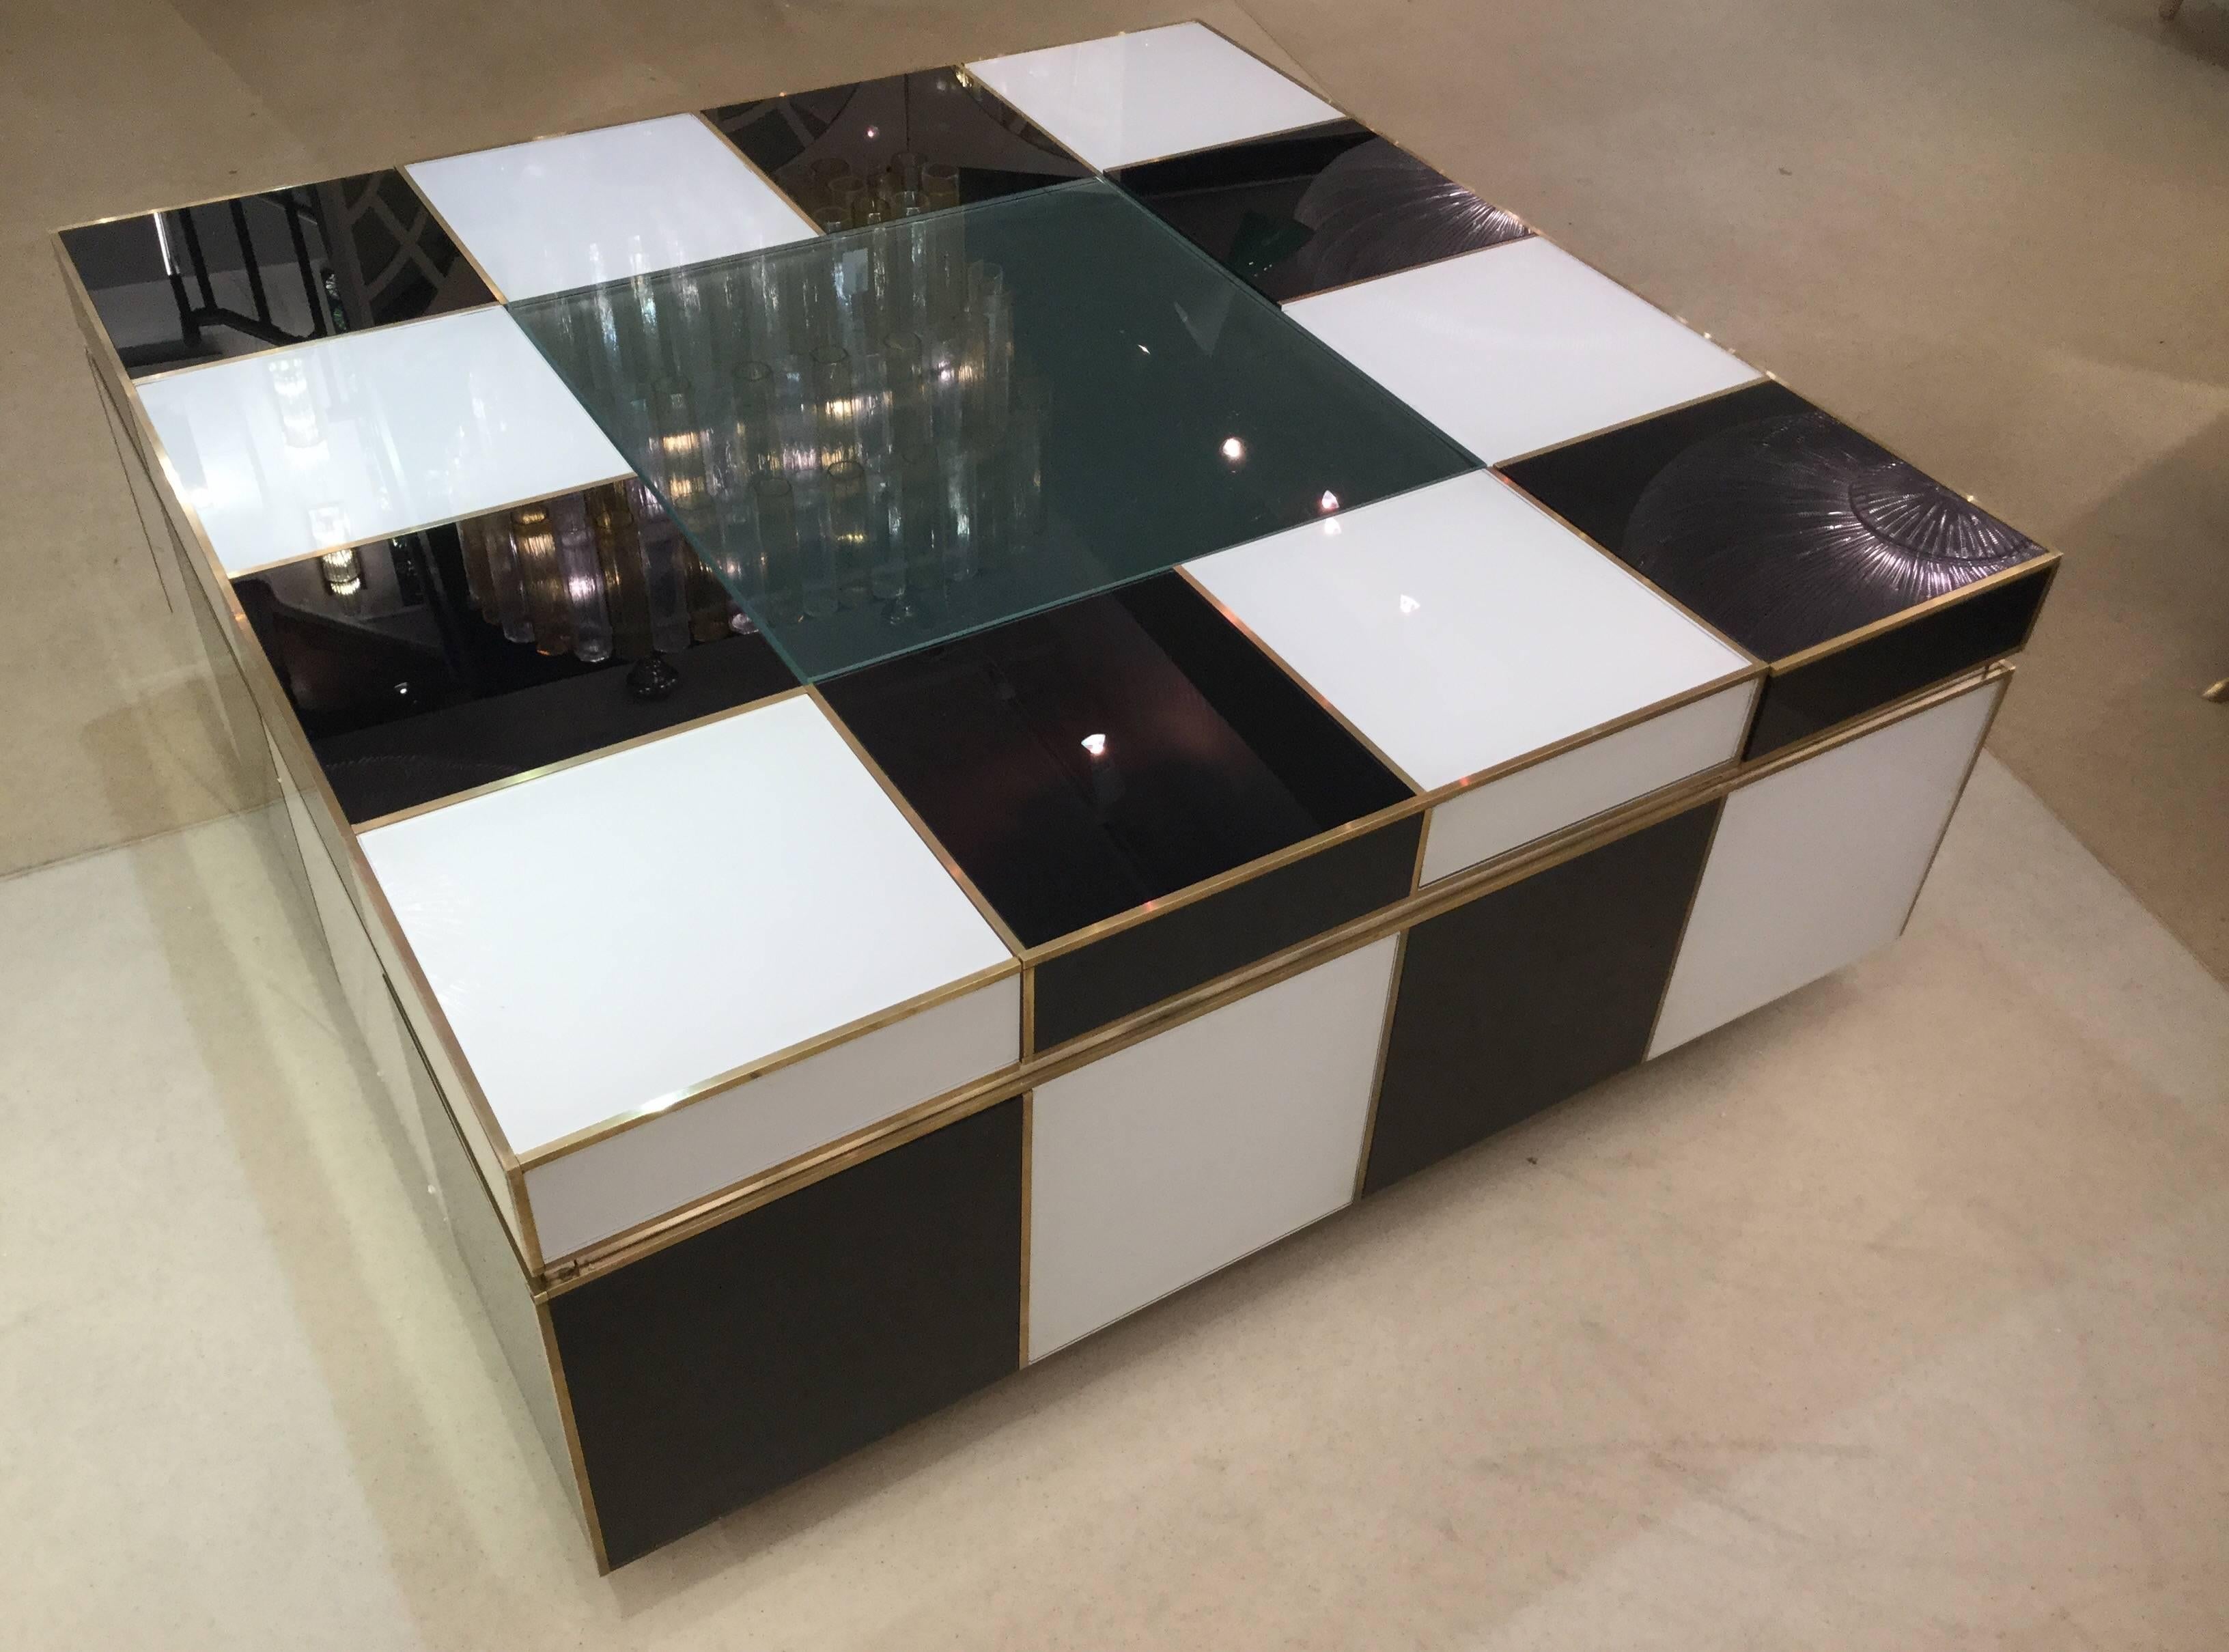 Italian 1970 coffee table in white and black glass. The top extends and the centre glass comes off to reveal an interior compartment.

Measures: cm 135 W X 101 D X 42 H (open).
 cm 101 W X 101 D X 42 H (close).